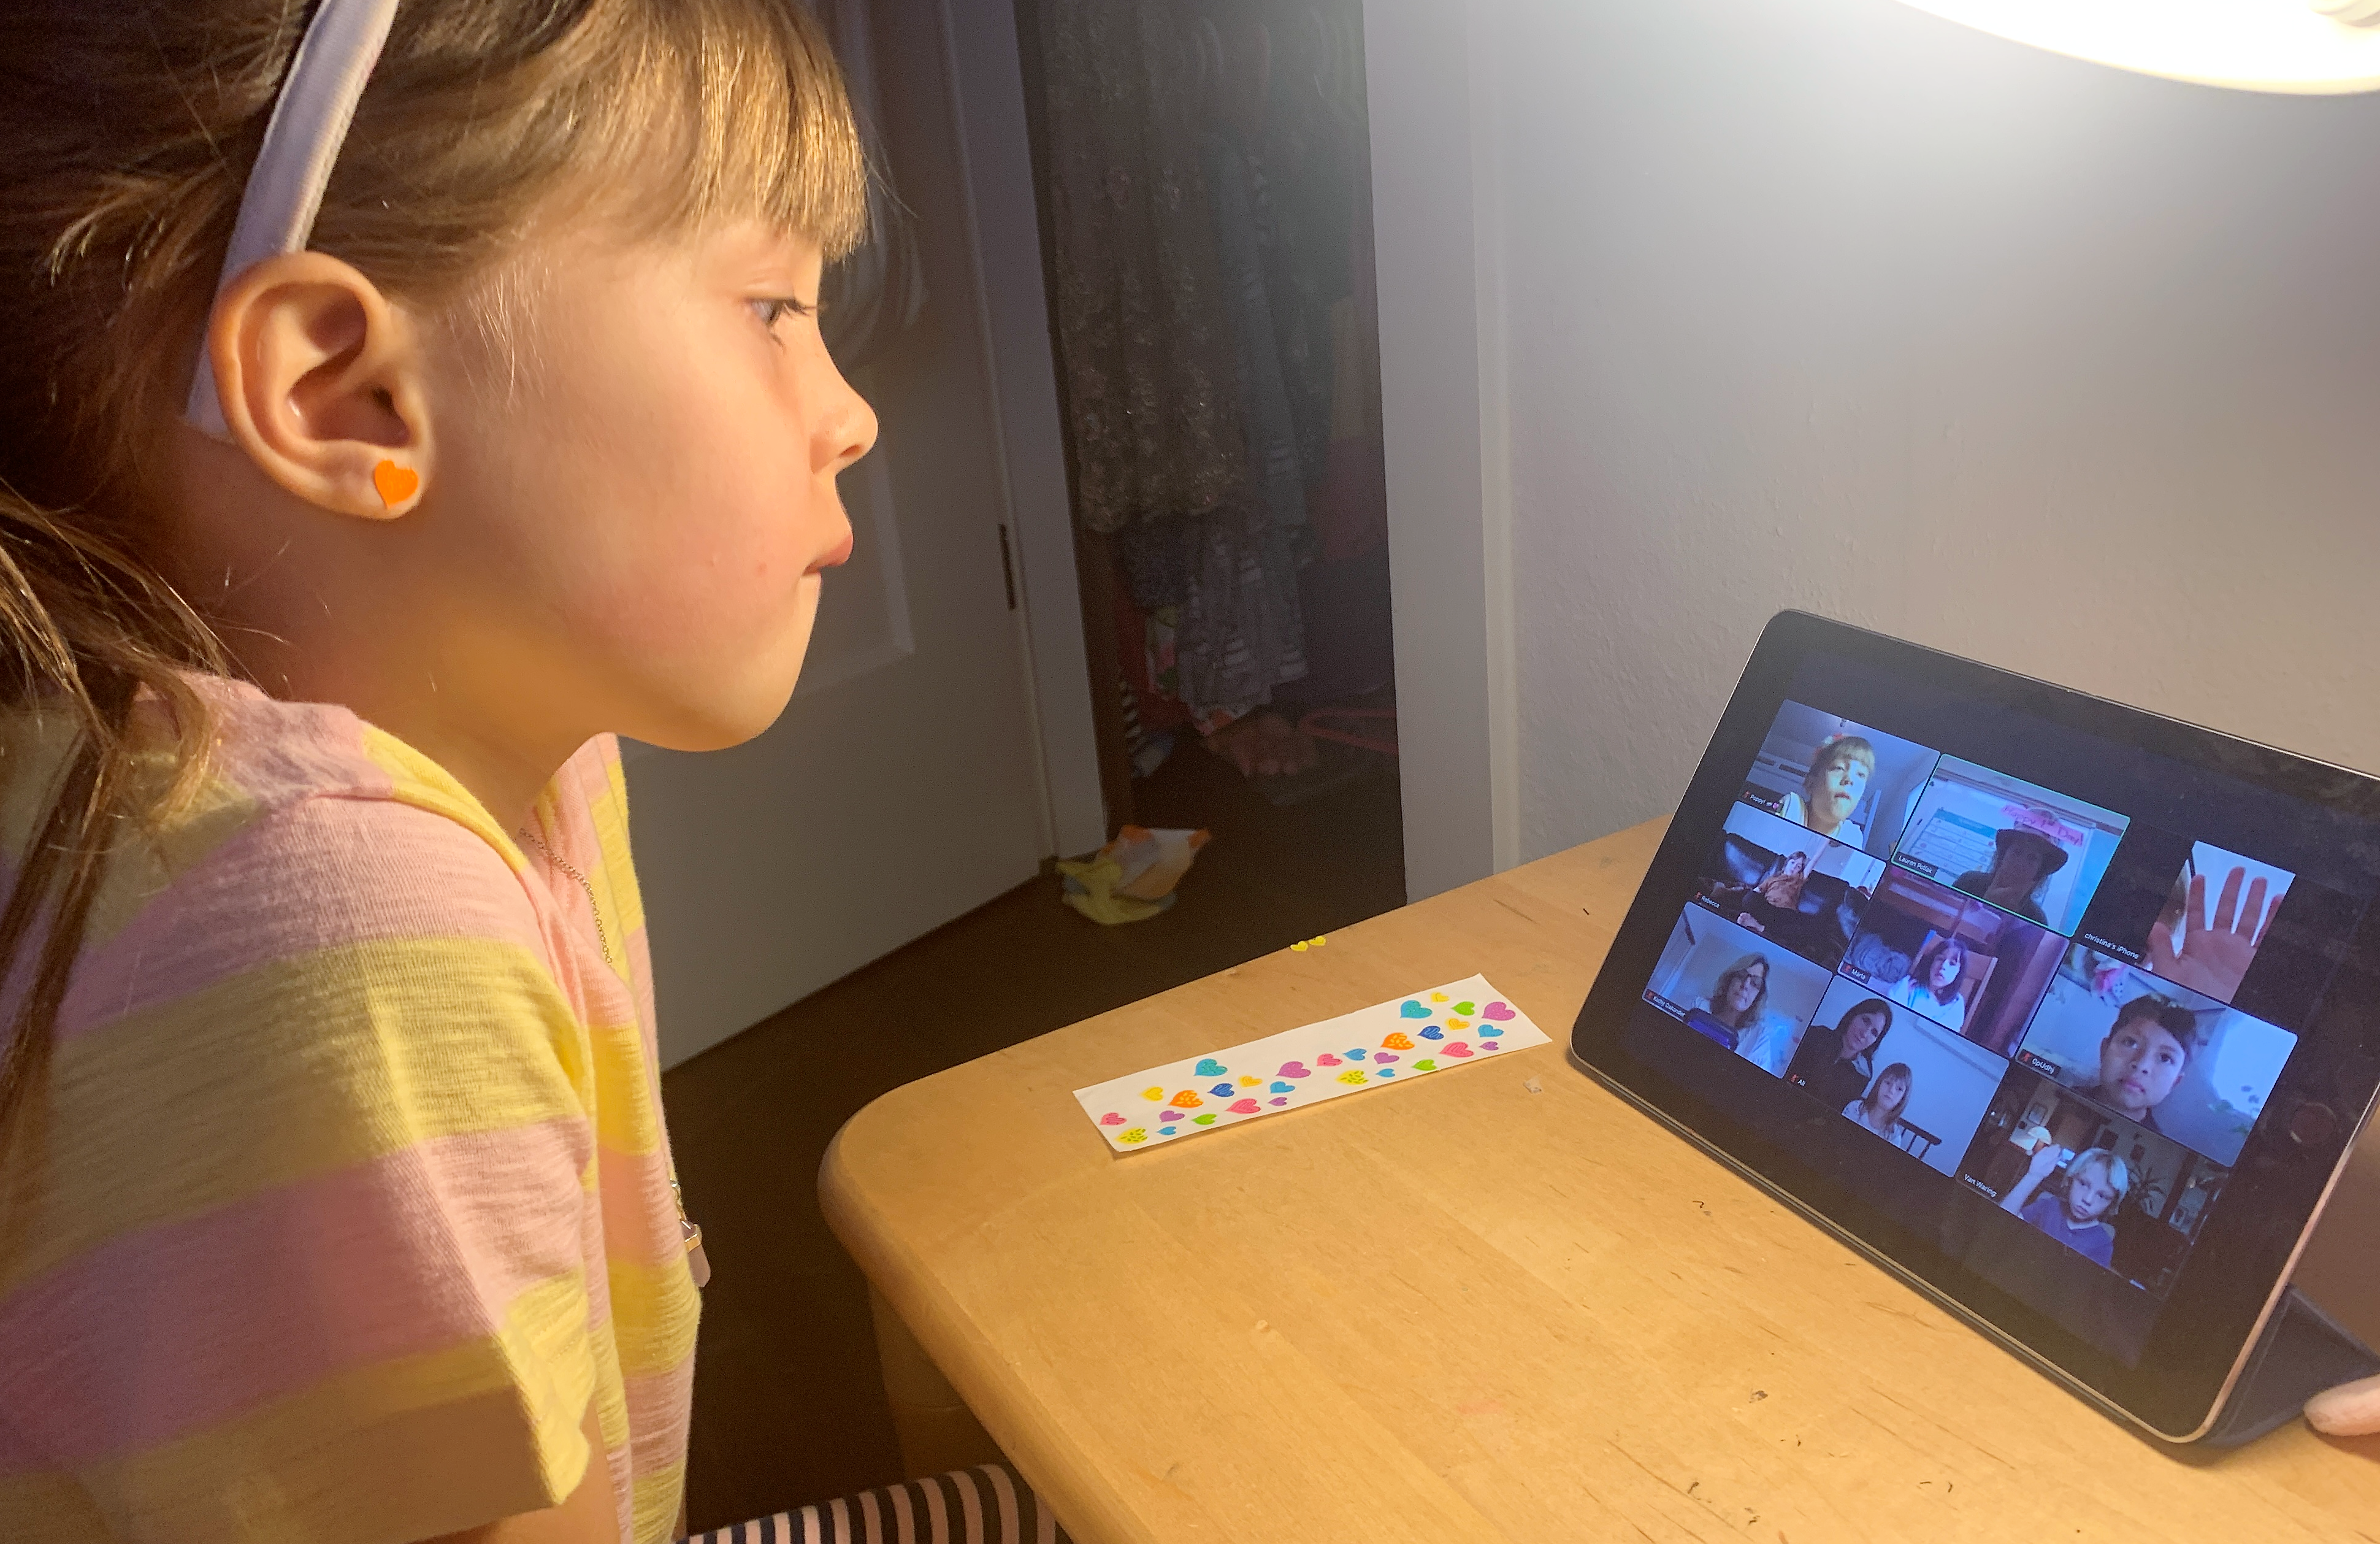 A girl of about 6 years old looks at an iPad as she participates in an online learning session.